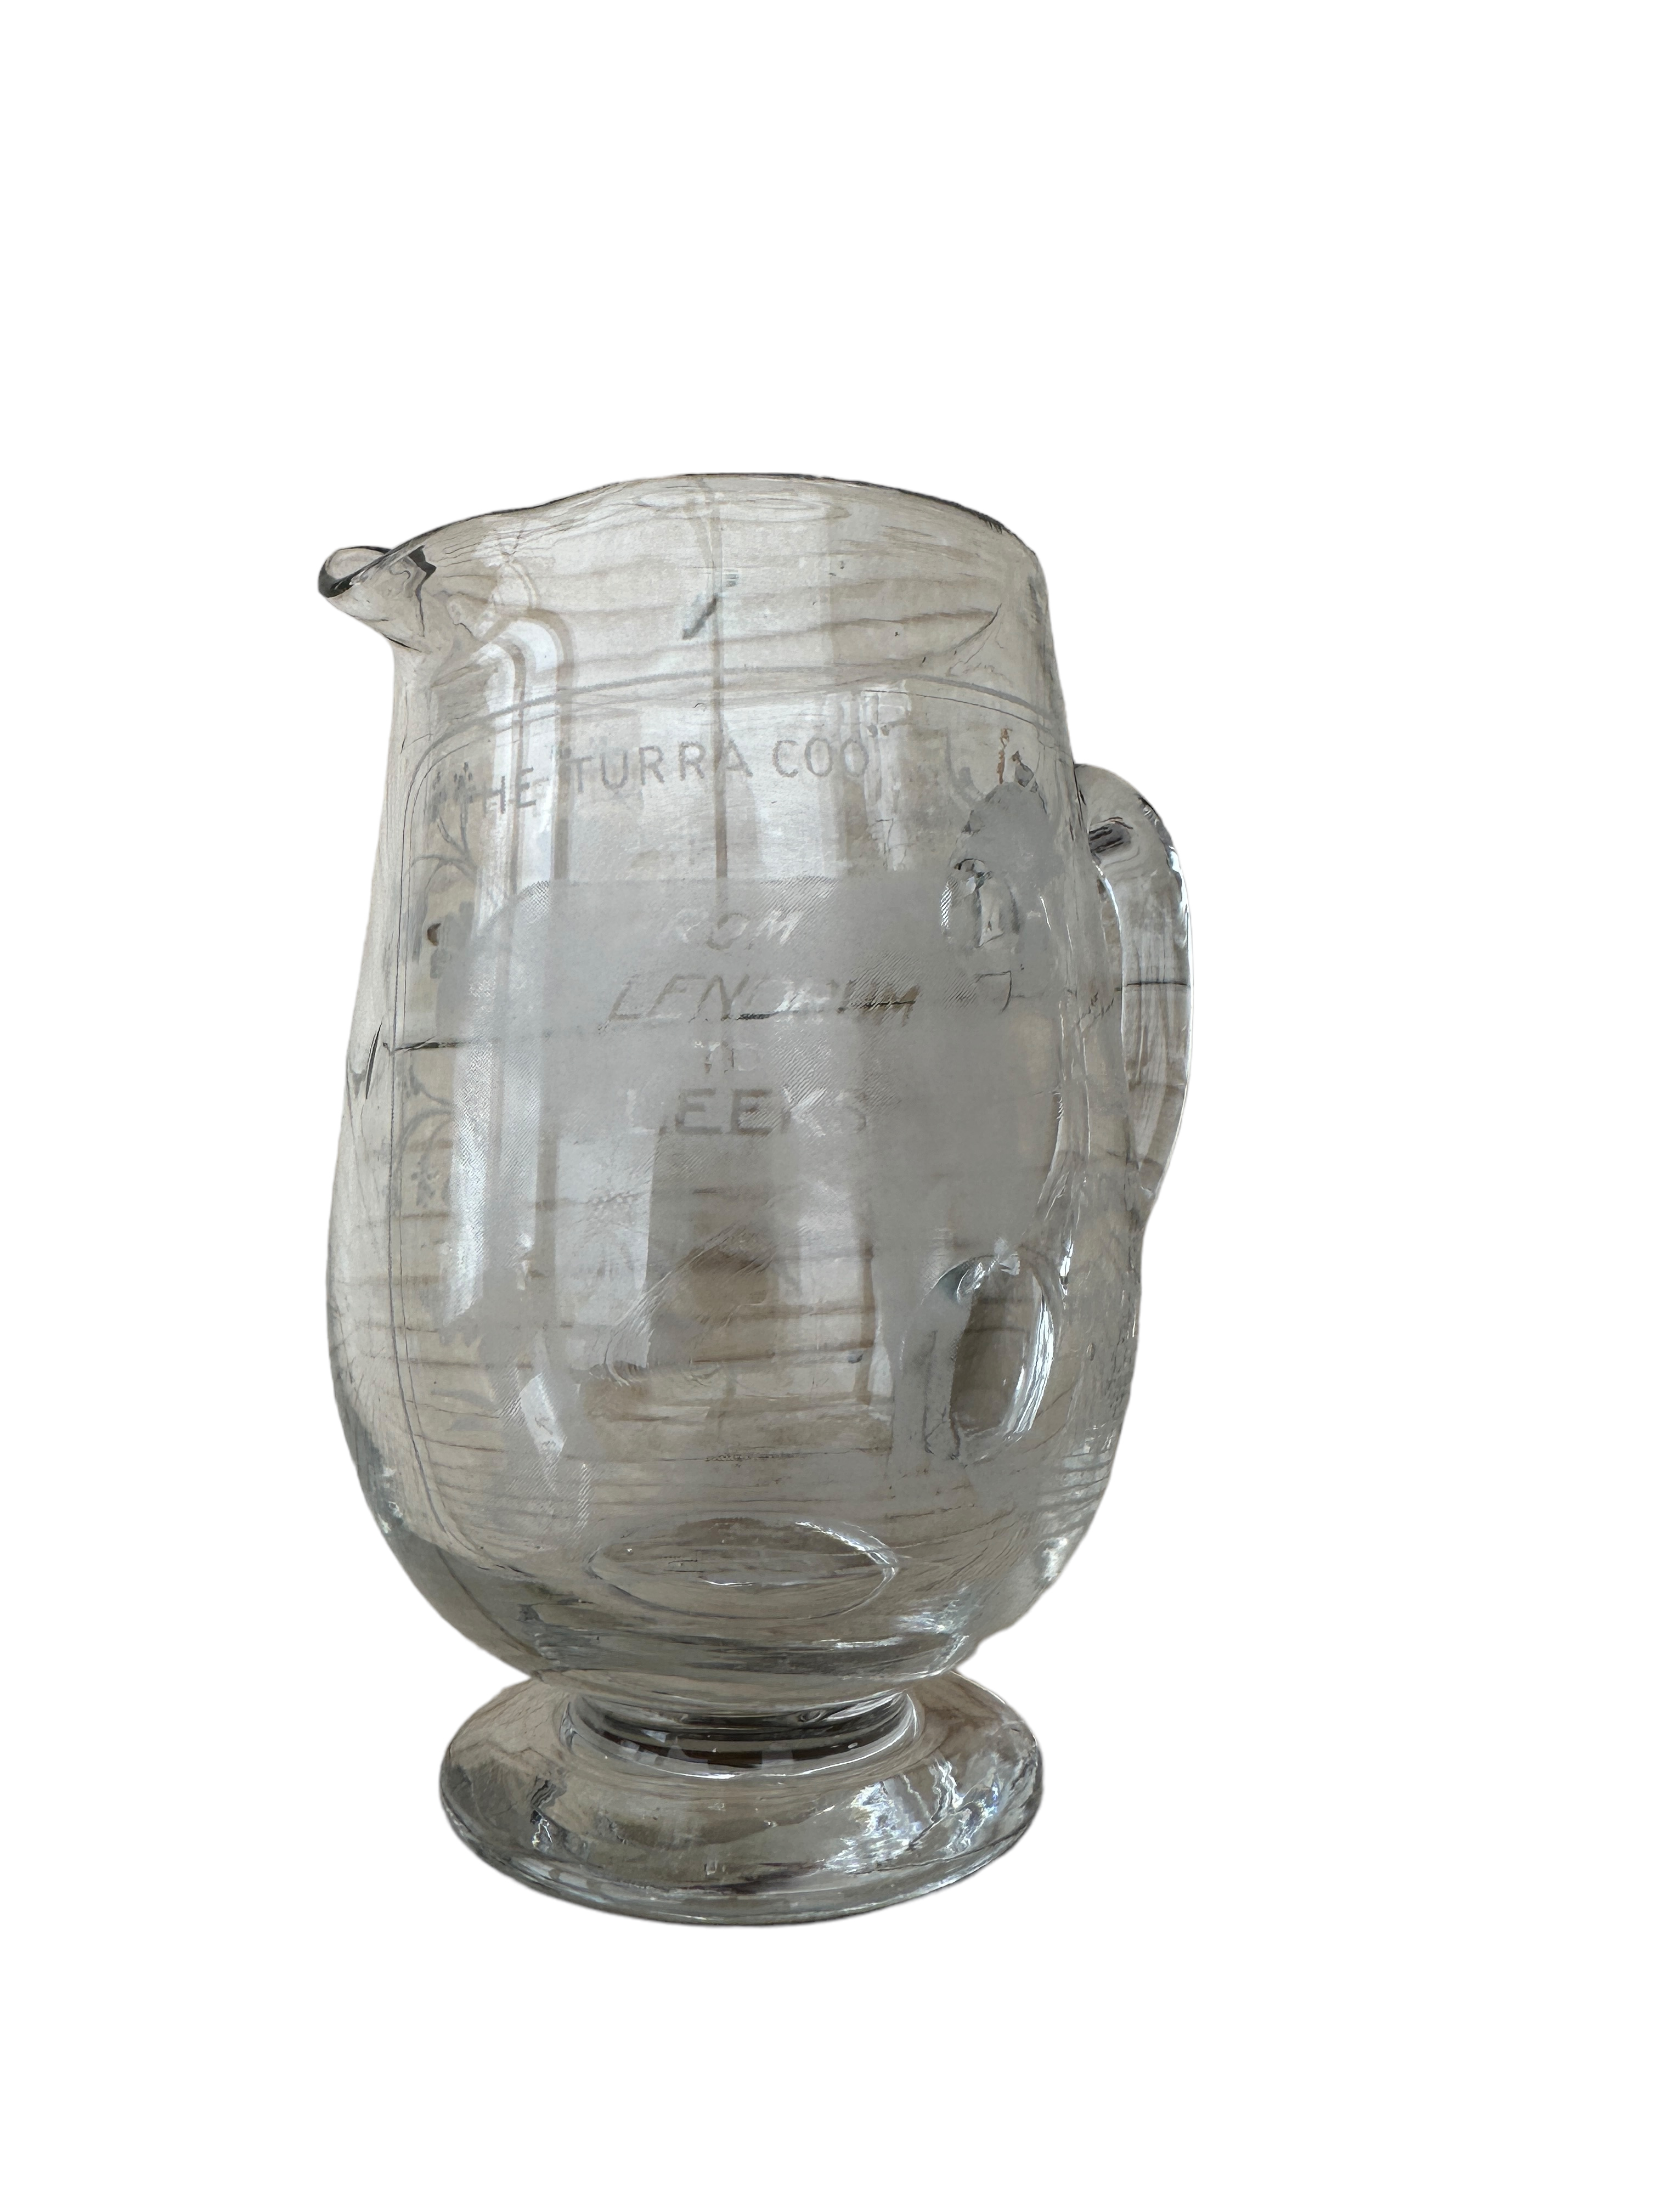 Antique Glass " The Turra Coo from Lendrum to Leeks" Jug - 4" tall. Condition Report: It is our - Image 7 of 8